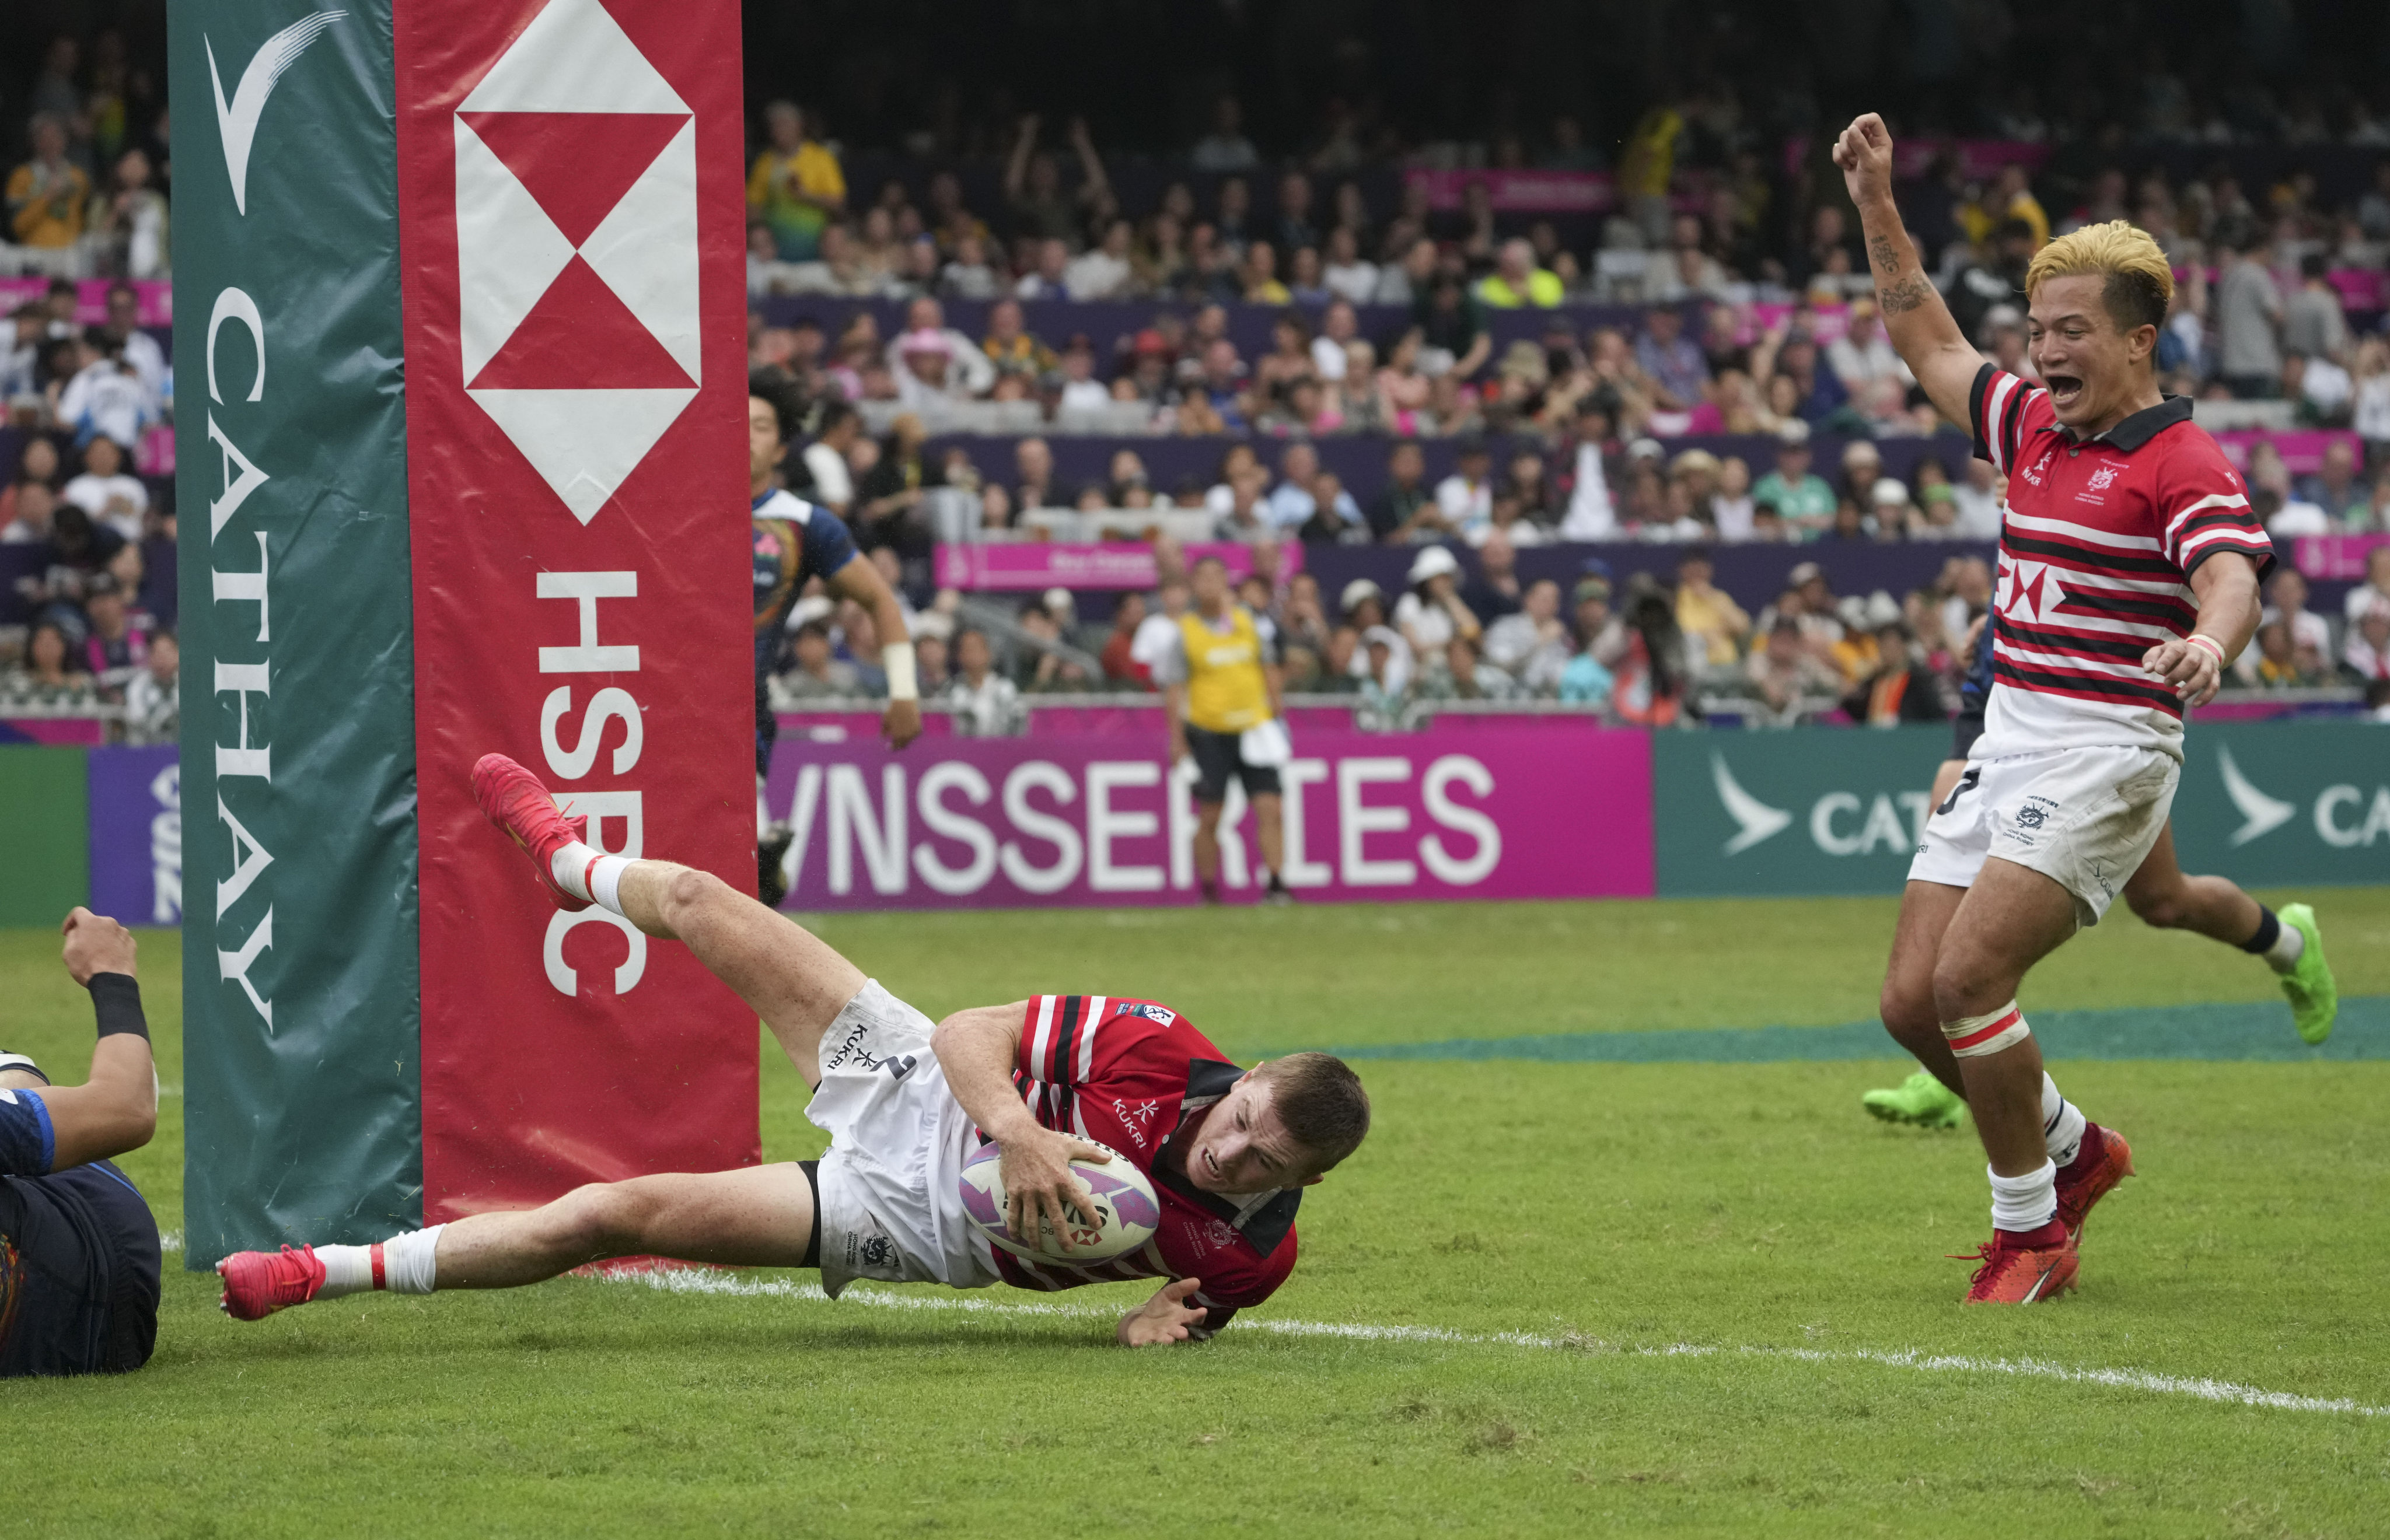 Hong Kong’s Hugo Stiles scores a try against Japan in the Melrose Claymore final as teammate James Christie celebrates. Photo: Sam Tsang